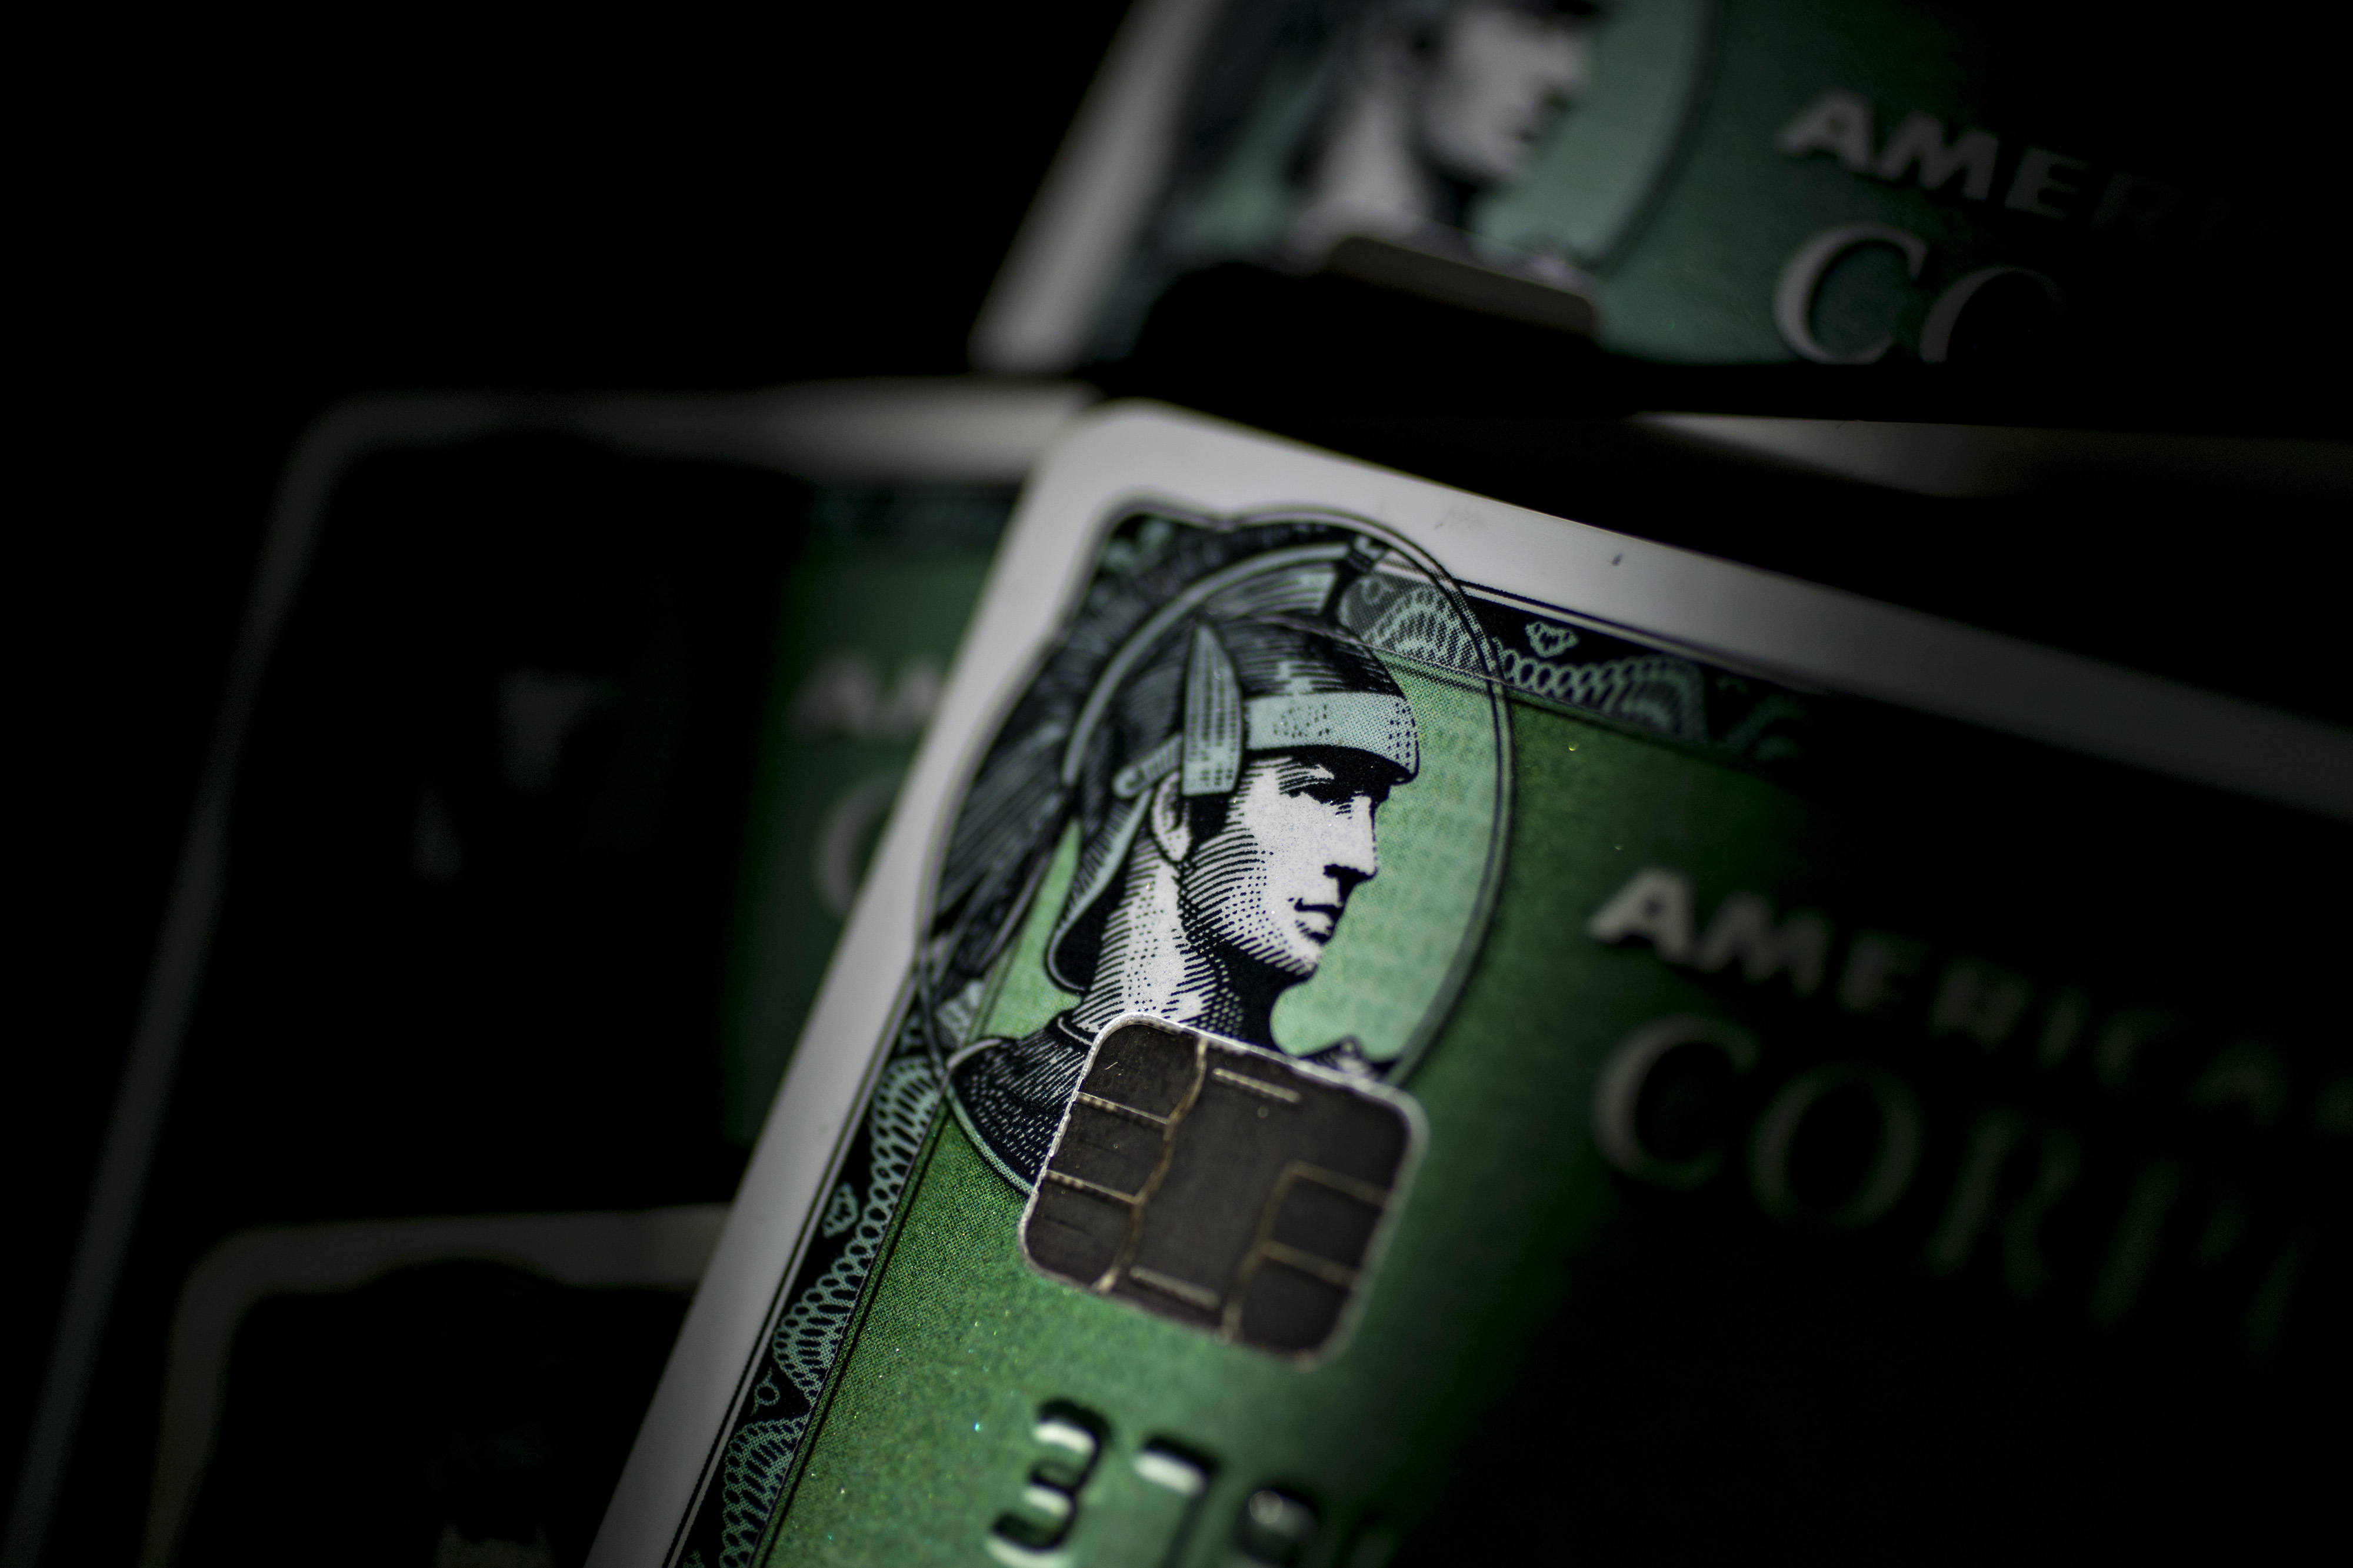 American Express Just Launched a New Feature for Cardmembers. But Is It a Good Deal?